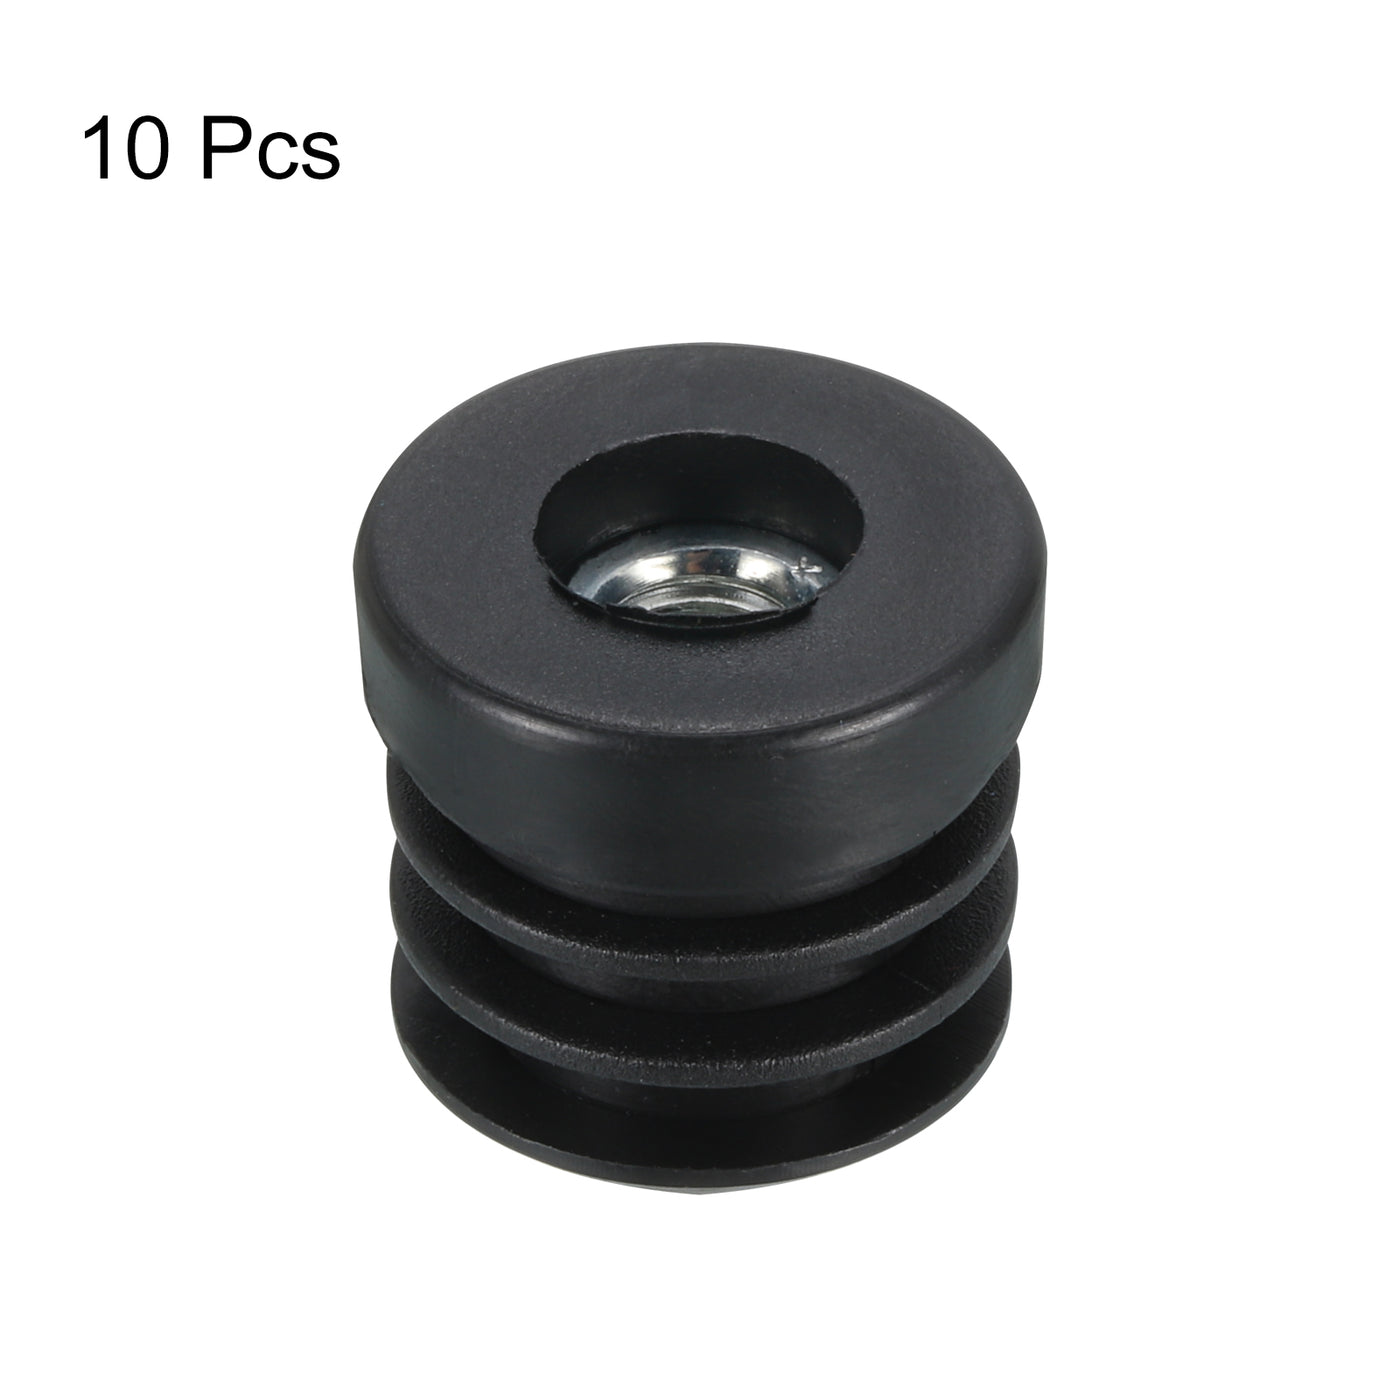 uxcell Uxcell 10Pcs Caster Insert with Thread, 25mm/0.98" M8 Thread for Furniture